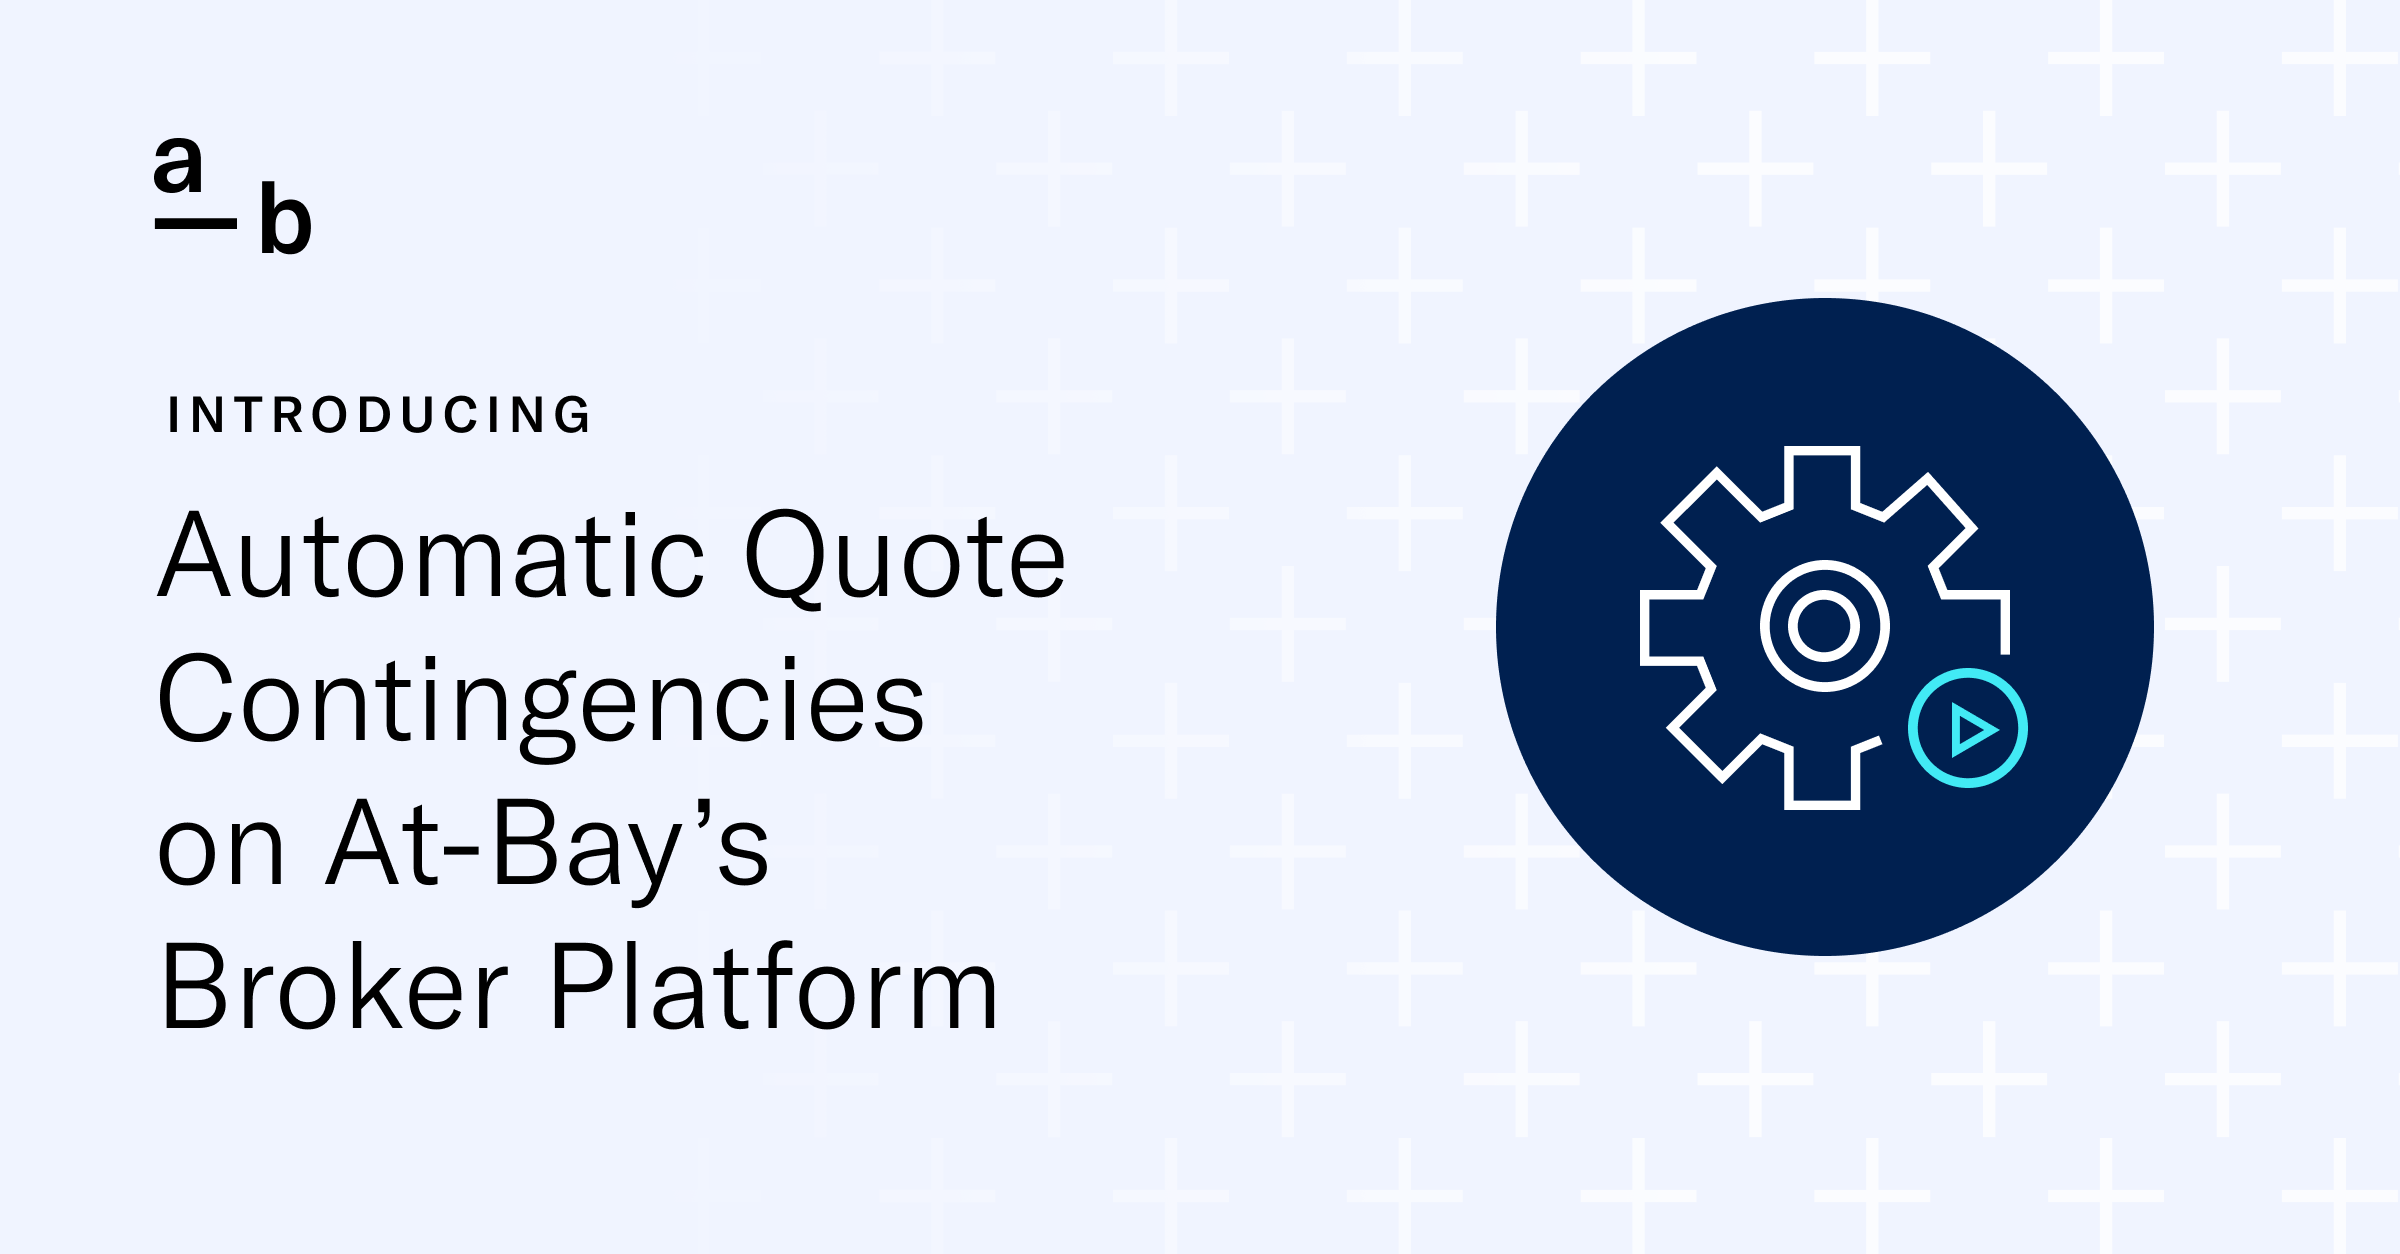 Introducing Automatic Quote Contingencies on At-Bay’s Broker Platform